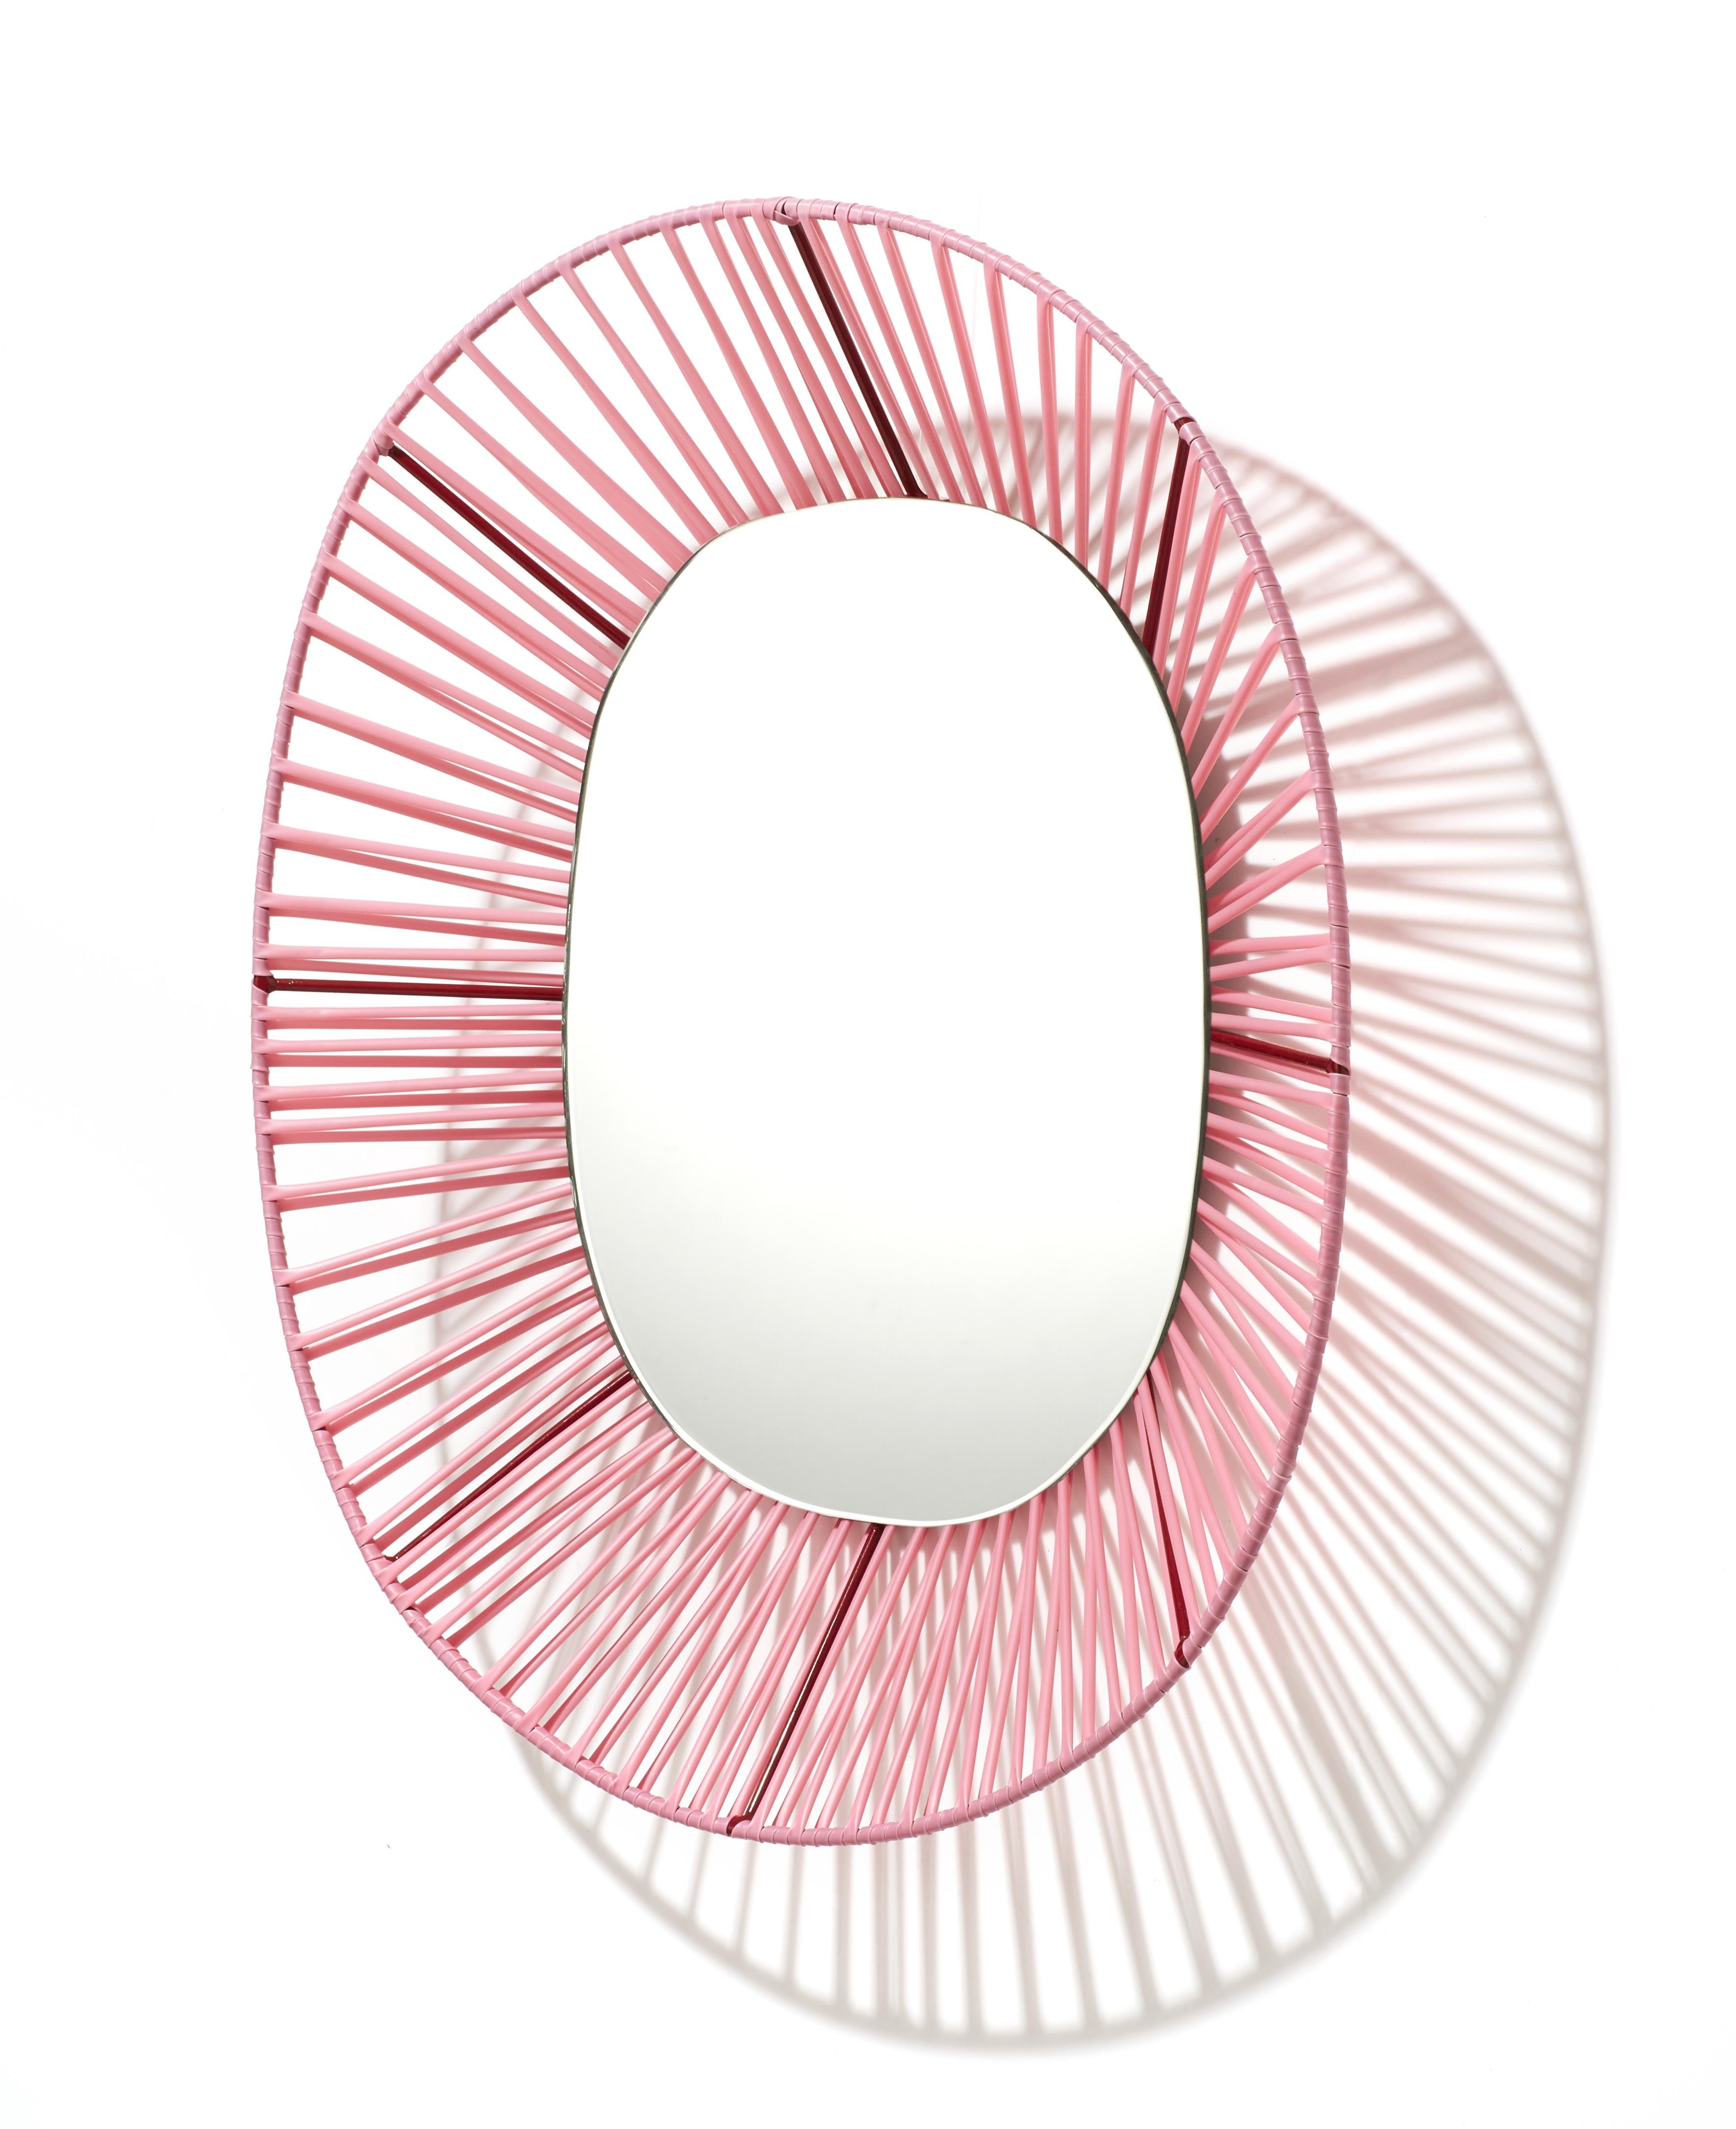 Powder-Coated Cesta Oval Mirror by Pauline Deltour